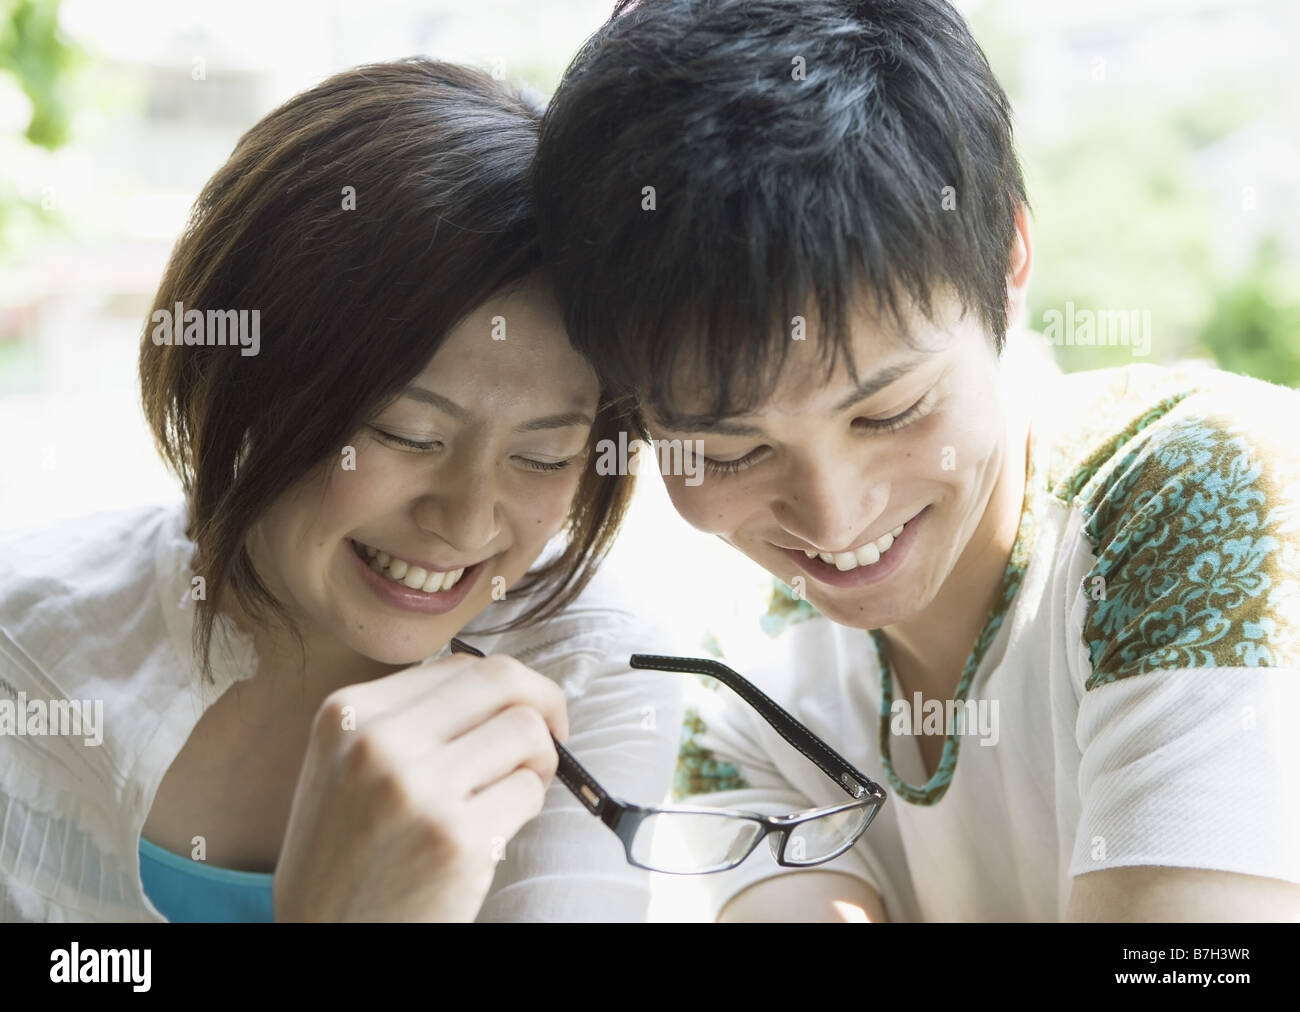 Two people having a good time Stock Photo